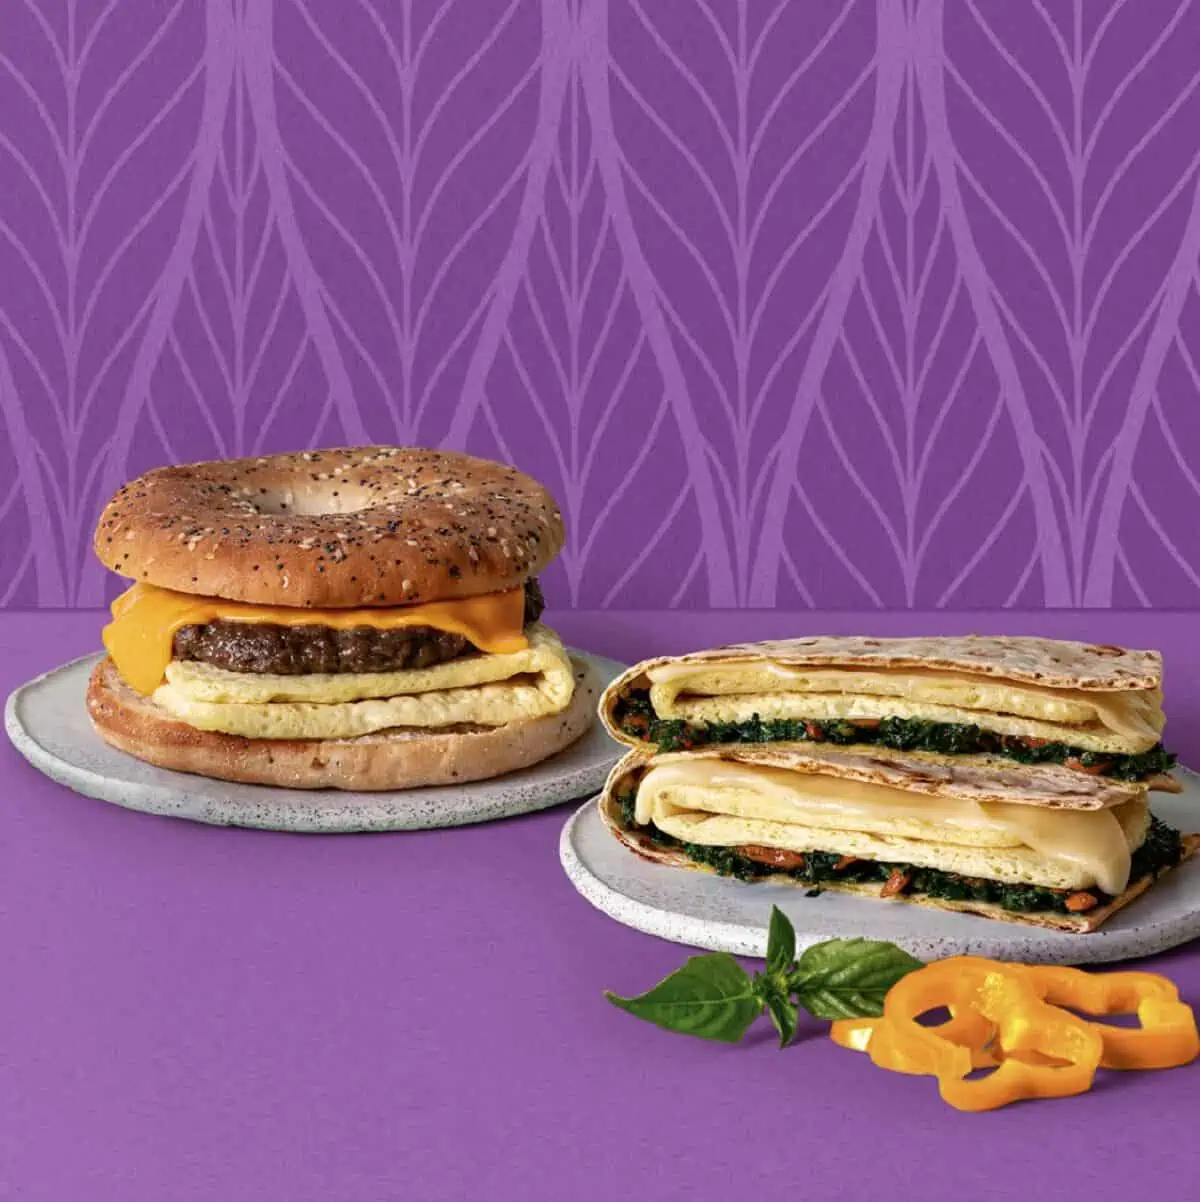 One vegan Just Egg and Violife Cheese Everything Bagel Sandwich and Mediterranean wrap laying on white plates on a purple patterned background with slices of orange bell pepper and spinach on the side.